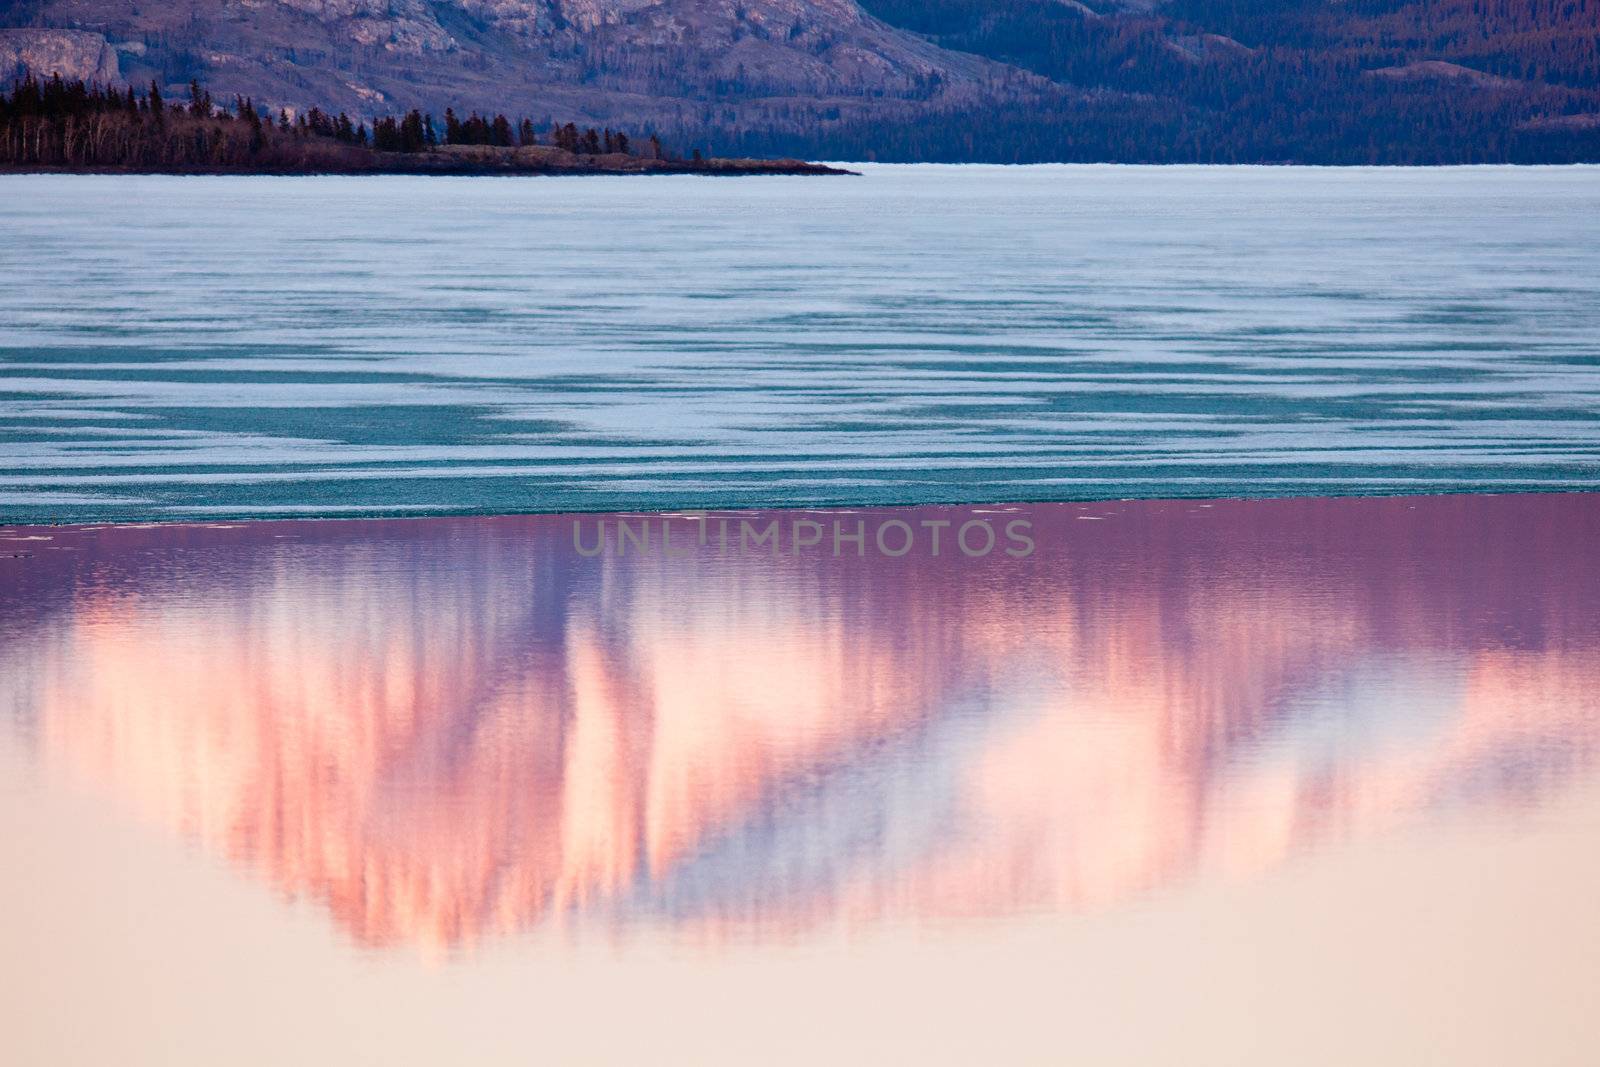 Mt Laurier mirrored on Lake Laberge, Yukon, Canada by PiLens